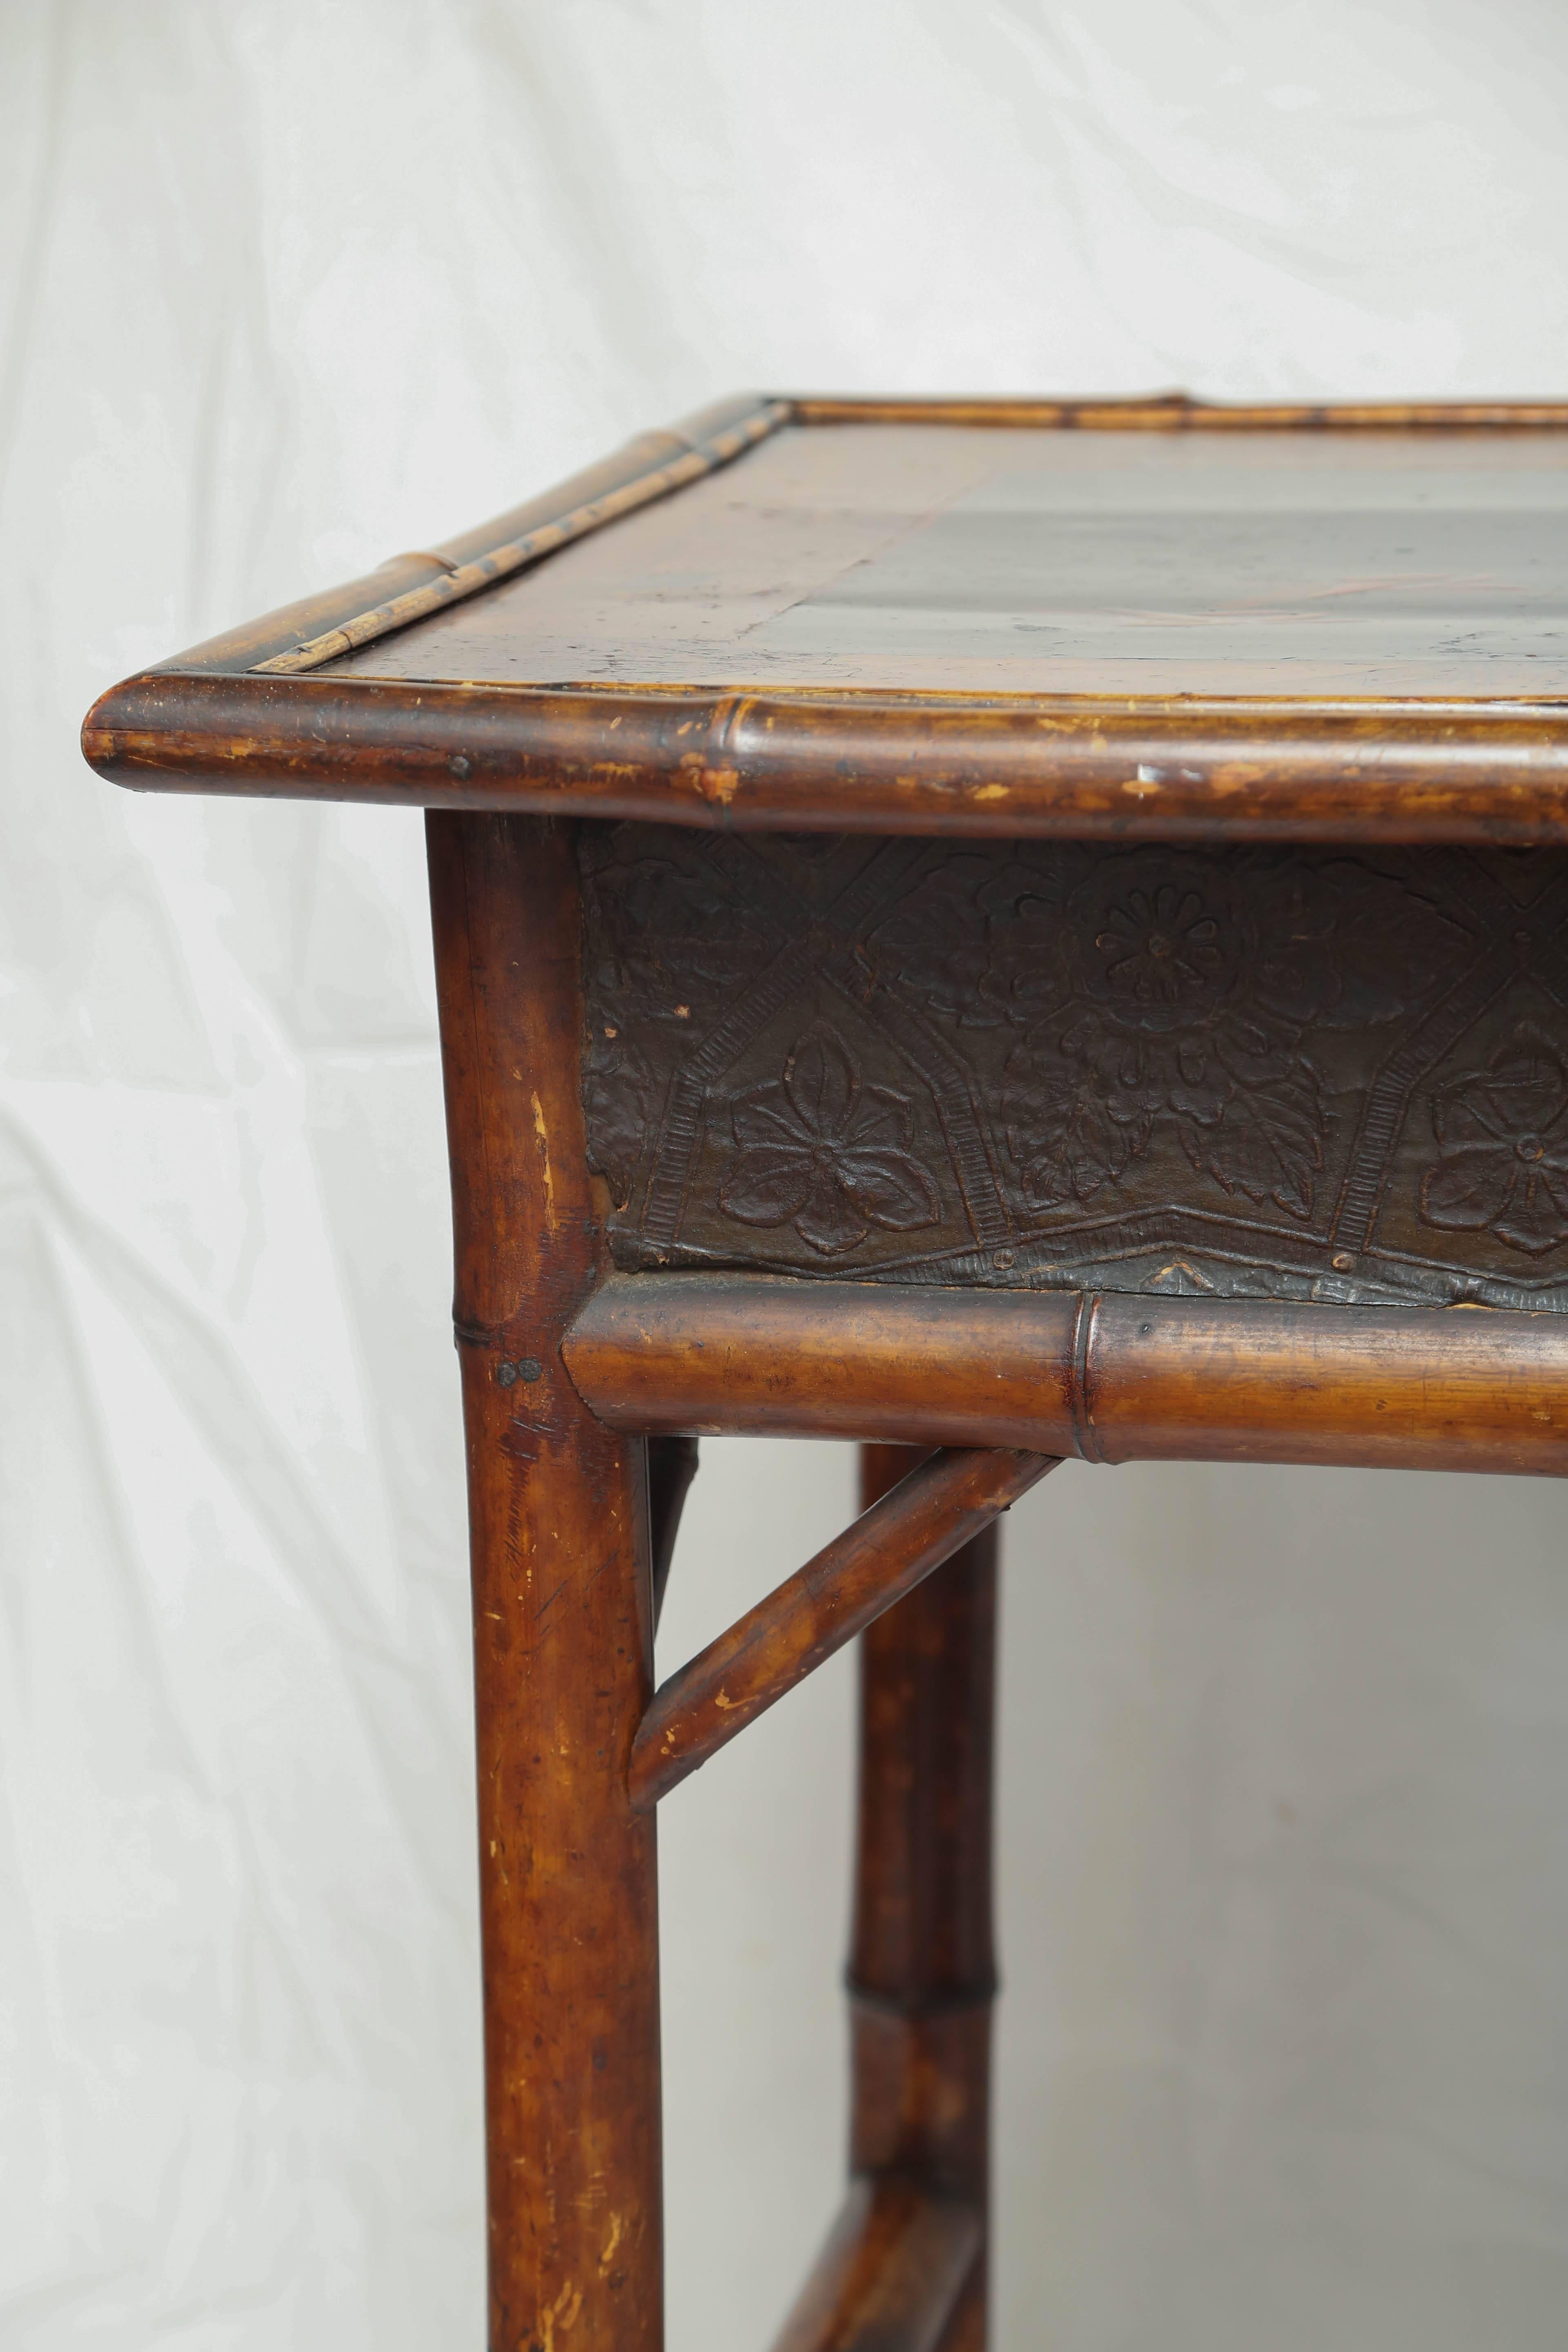 Very nice English bamboo lacquer side table with Japanning and a drawer.